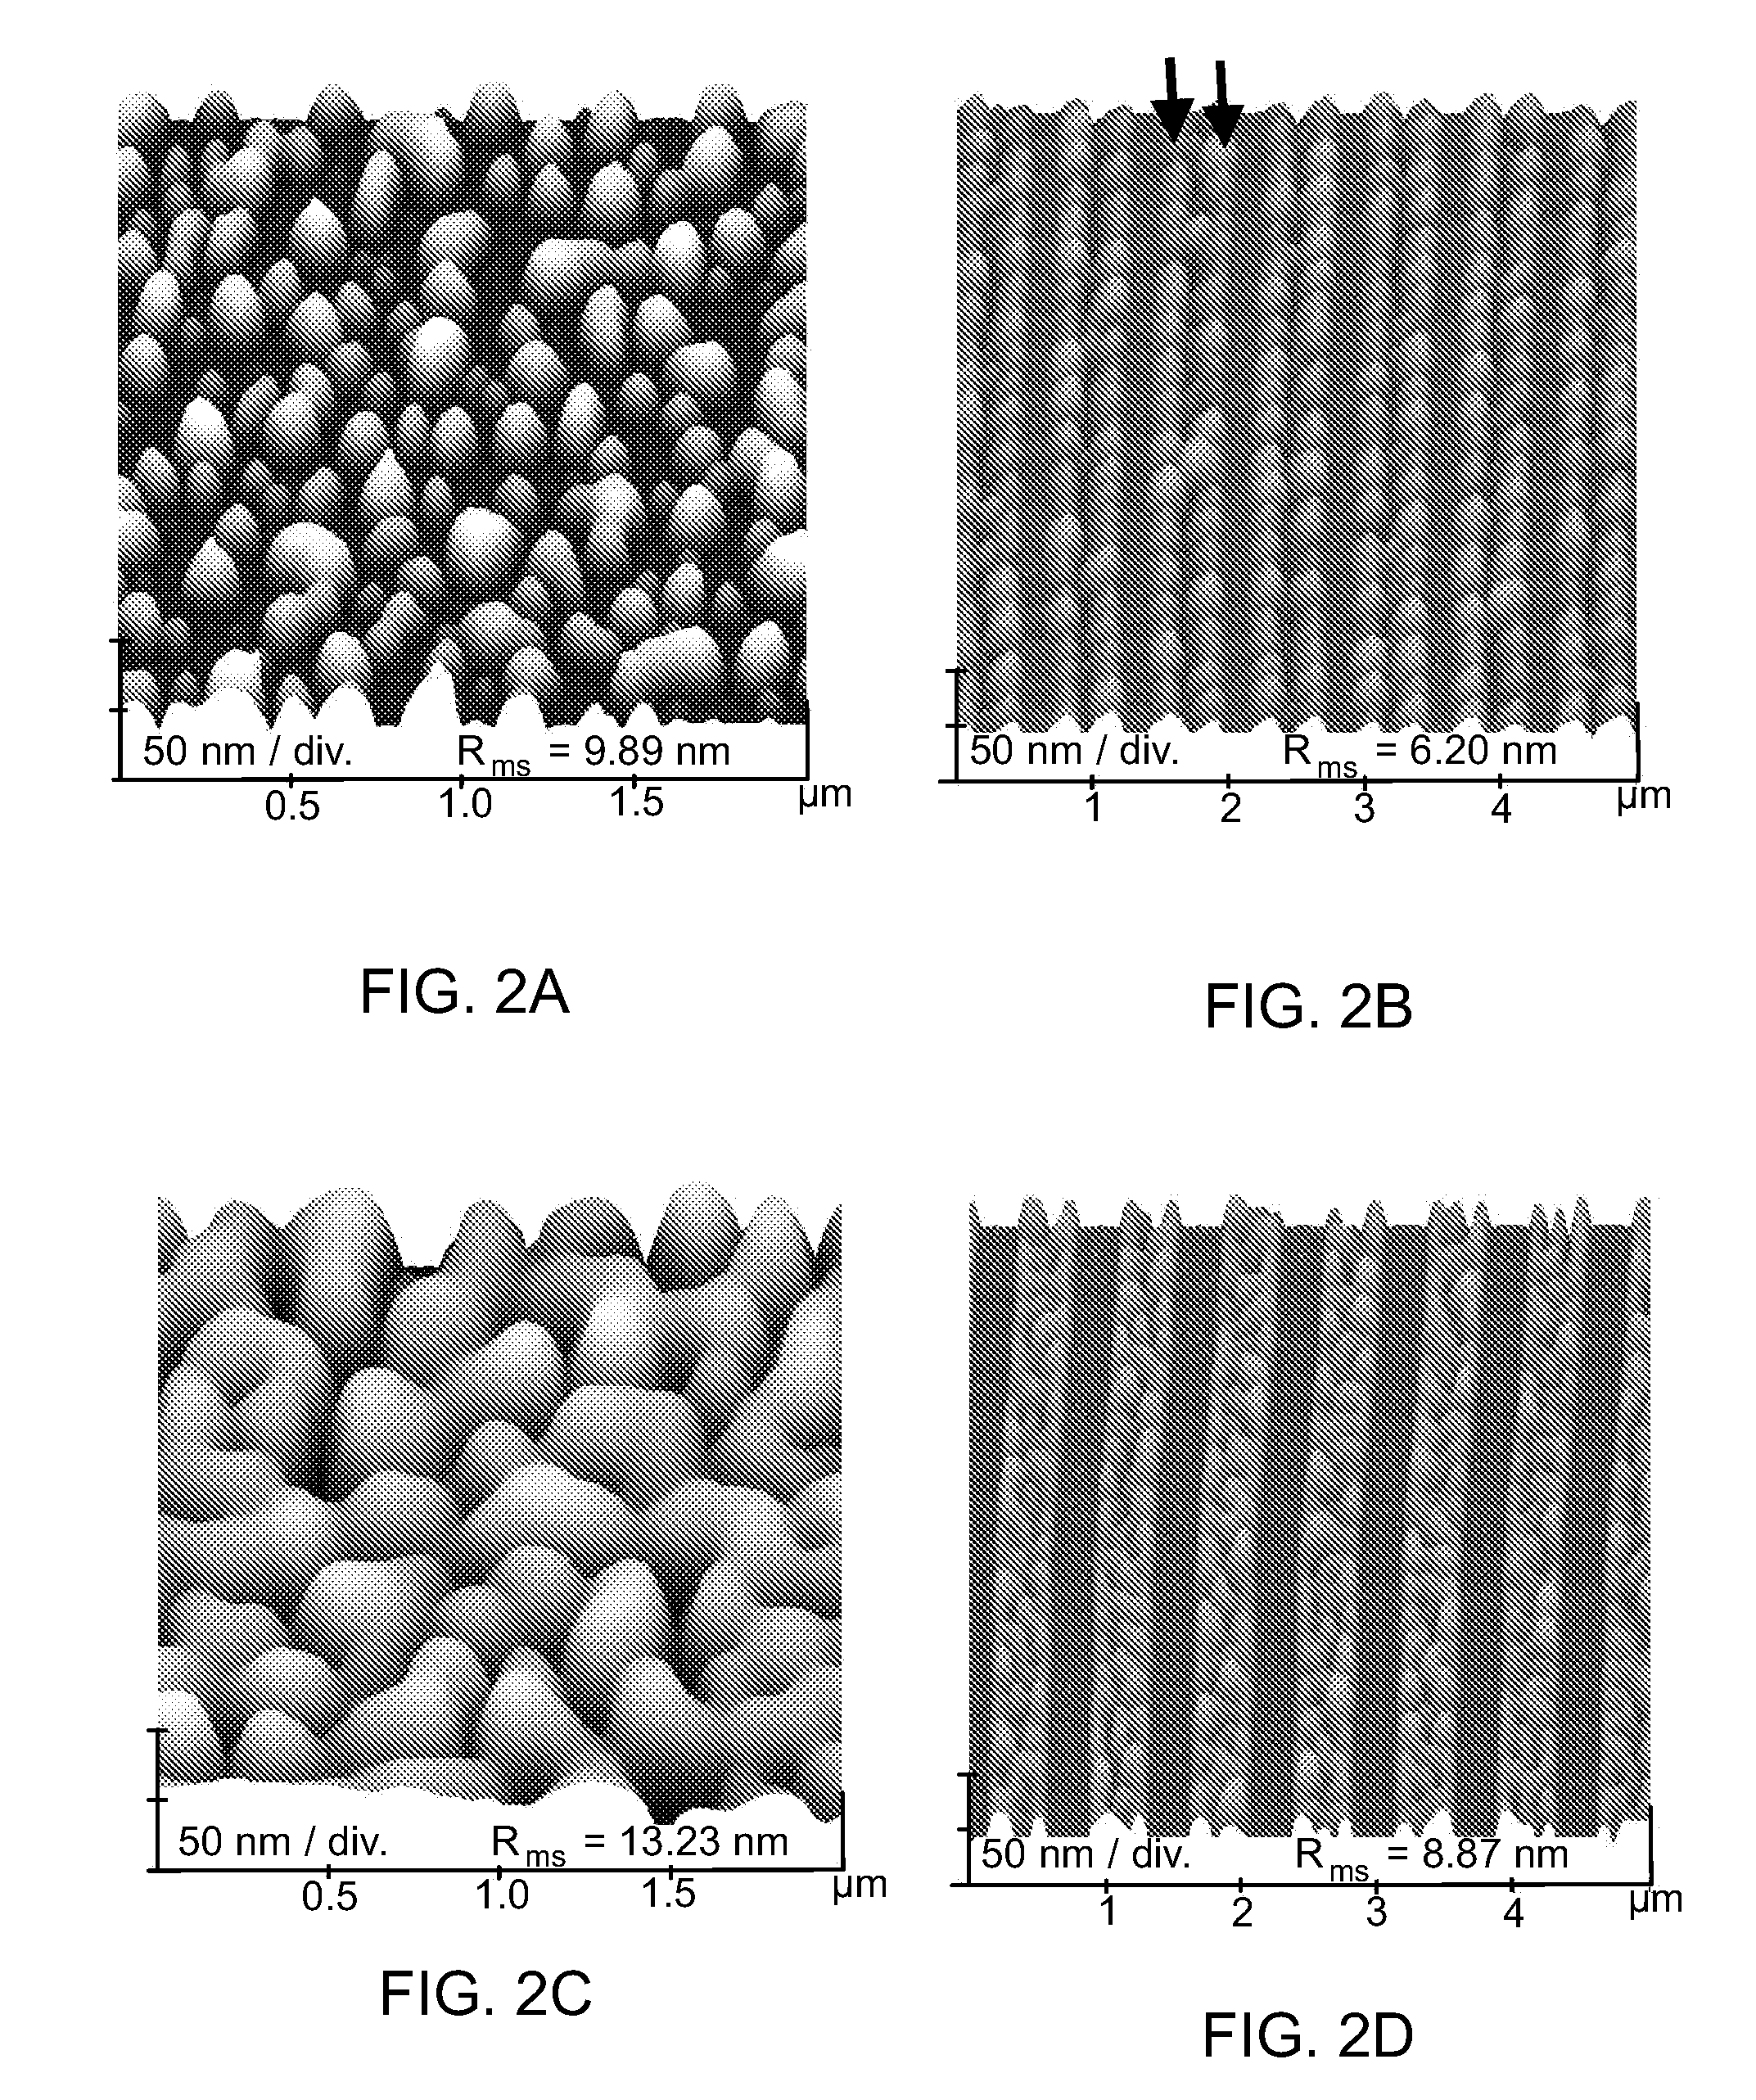 Epitazial growth of crystalline material